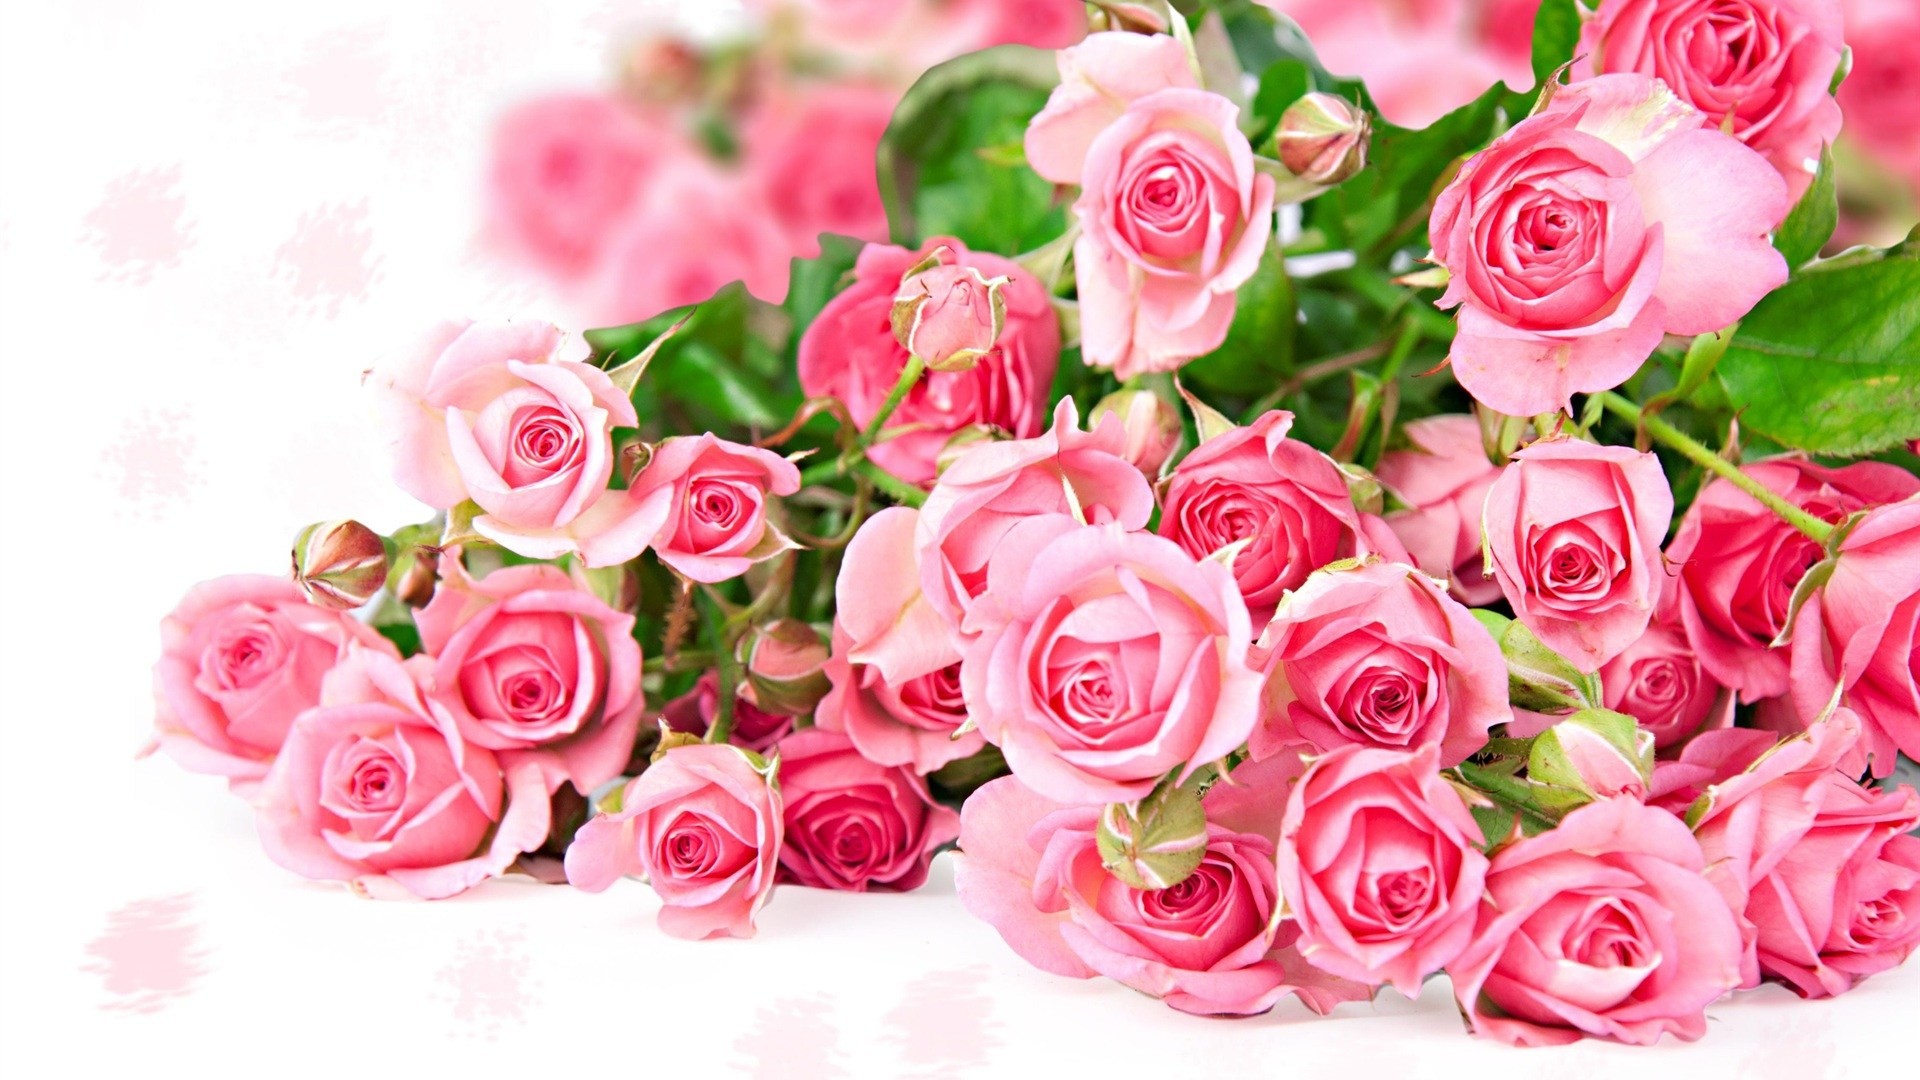 1920x1080 Roses Wallpaper Full Hd Pics Worlds Top Flowers Photos For Iphone